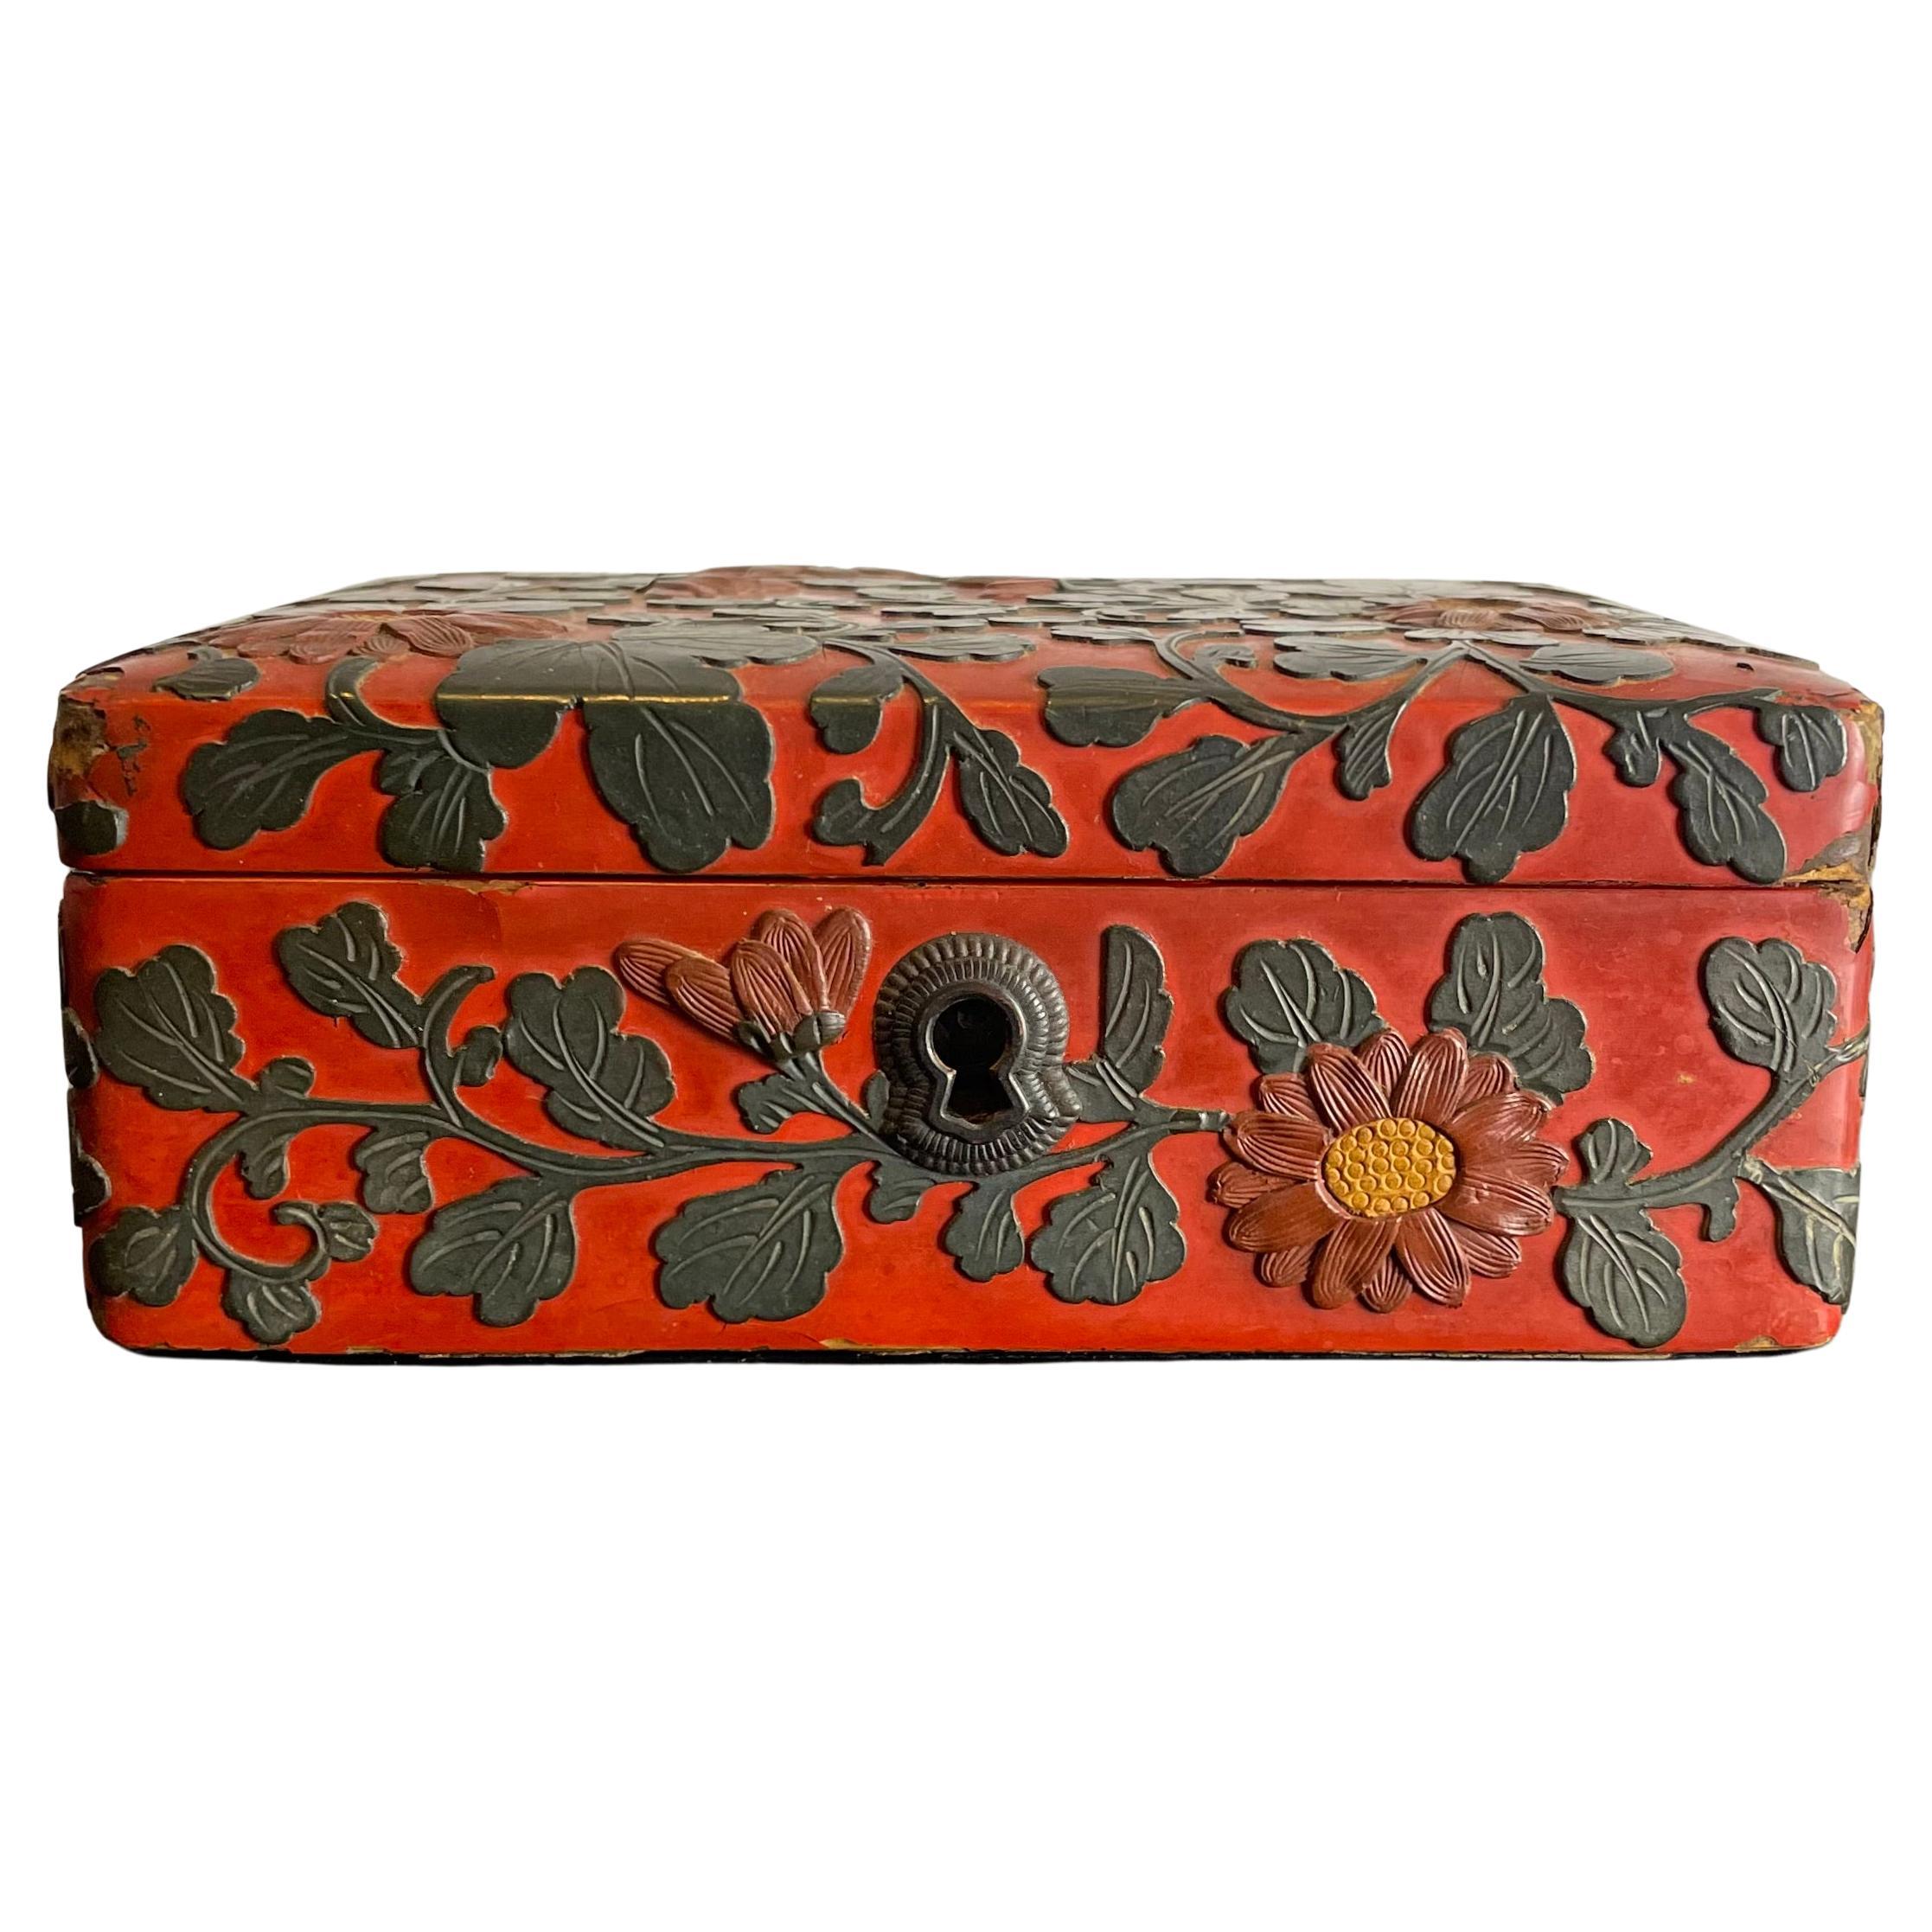 Chinese Box Cinnabar Lacquered Red and Black, 19th Century For Sale